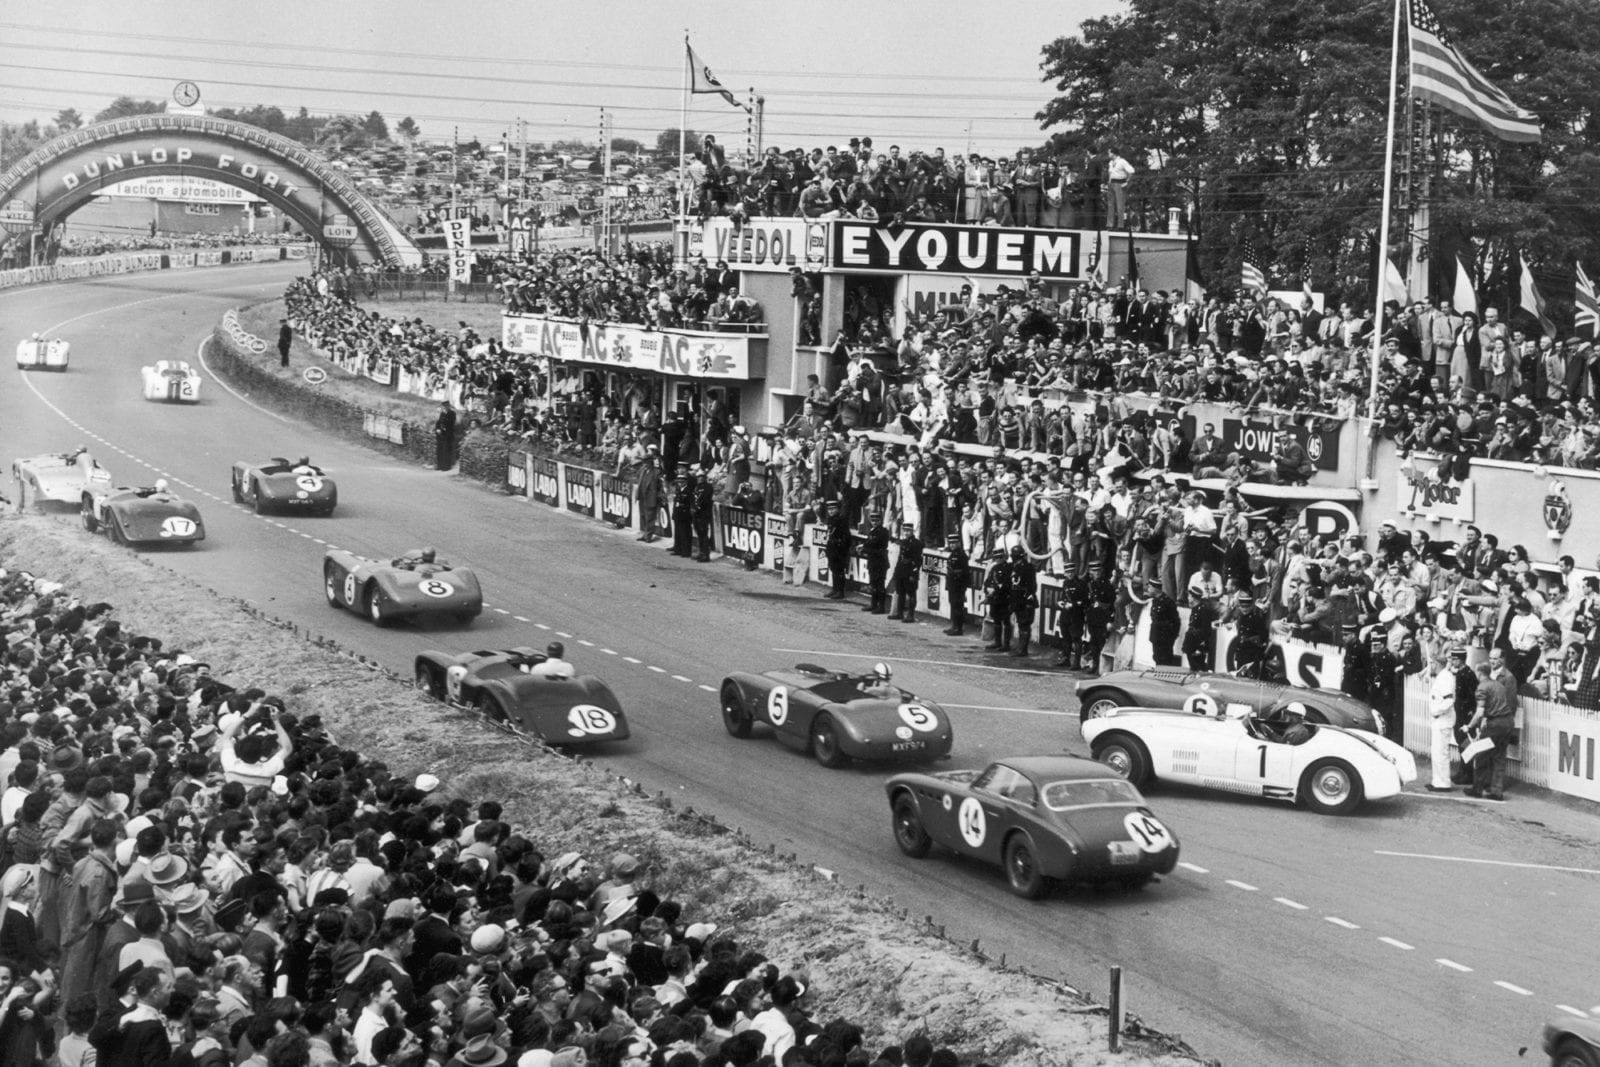 Start of the 1952 Le Mans 24 Hours race